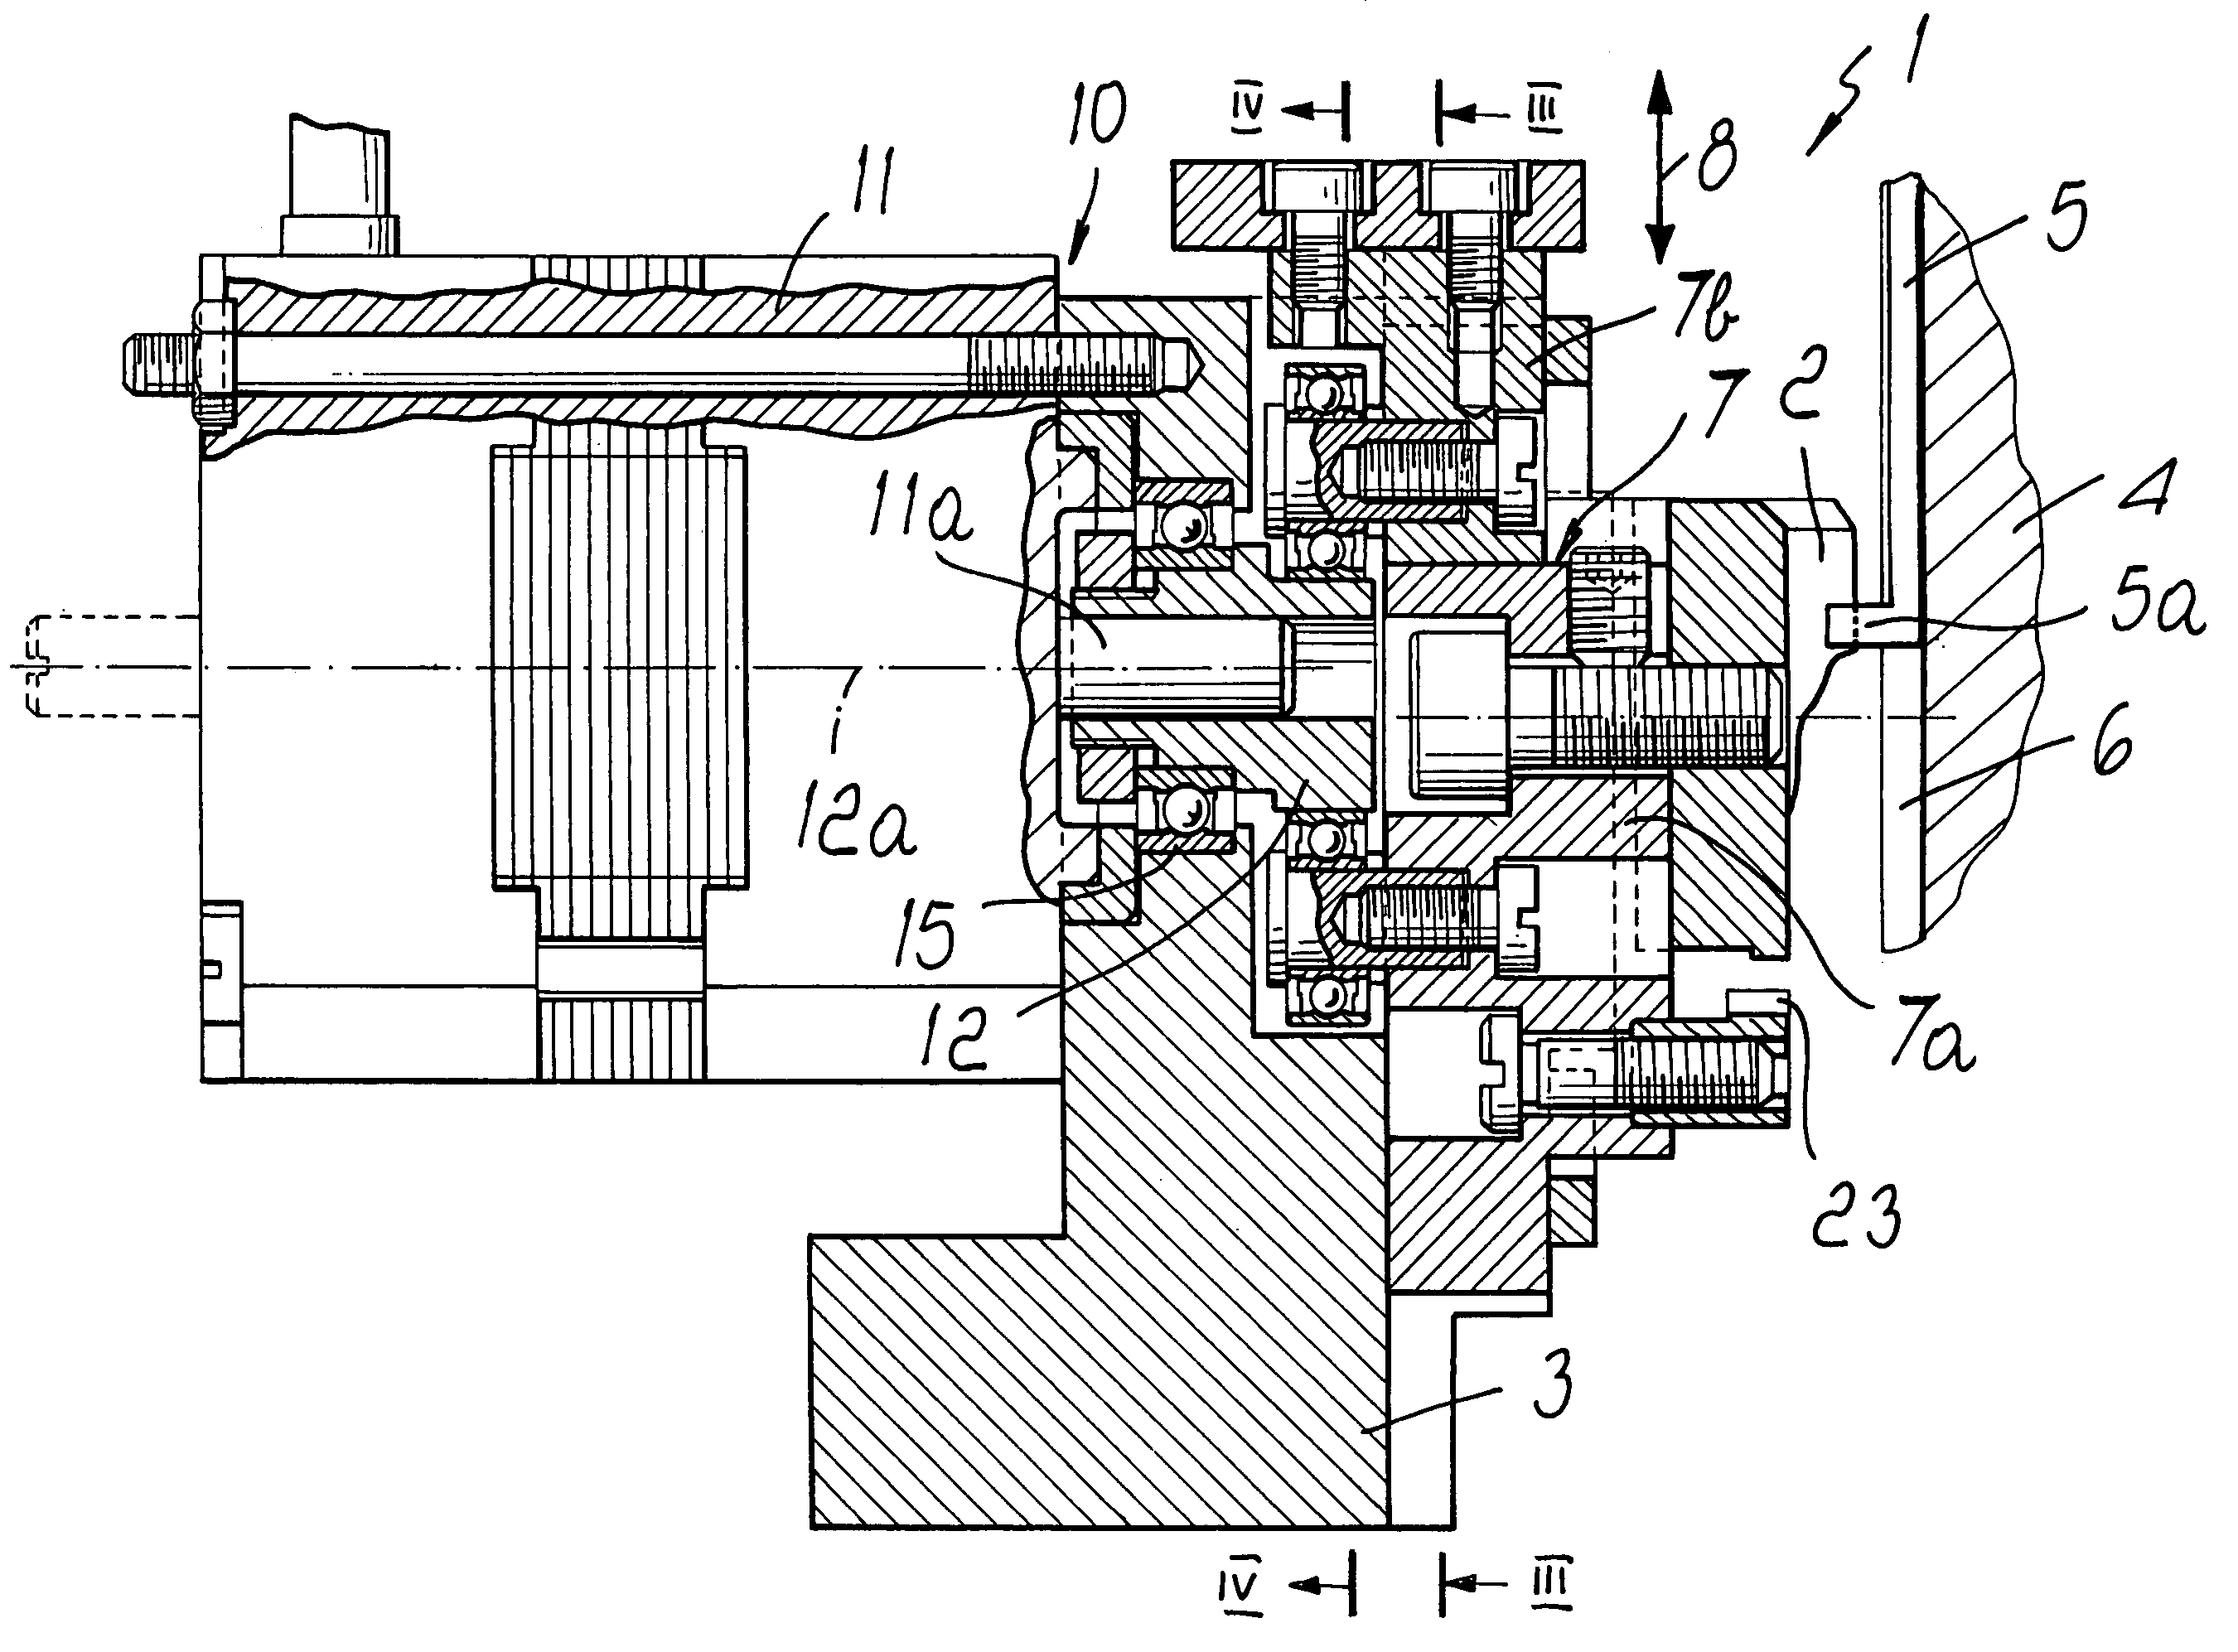 Device for varying stitch tightness for knitting machine for hosiery or the like, particularly for circular knitting machines